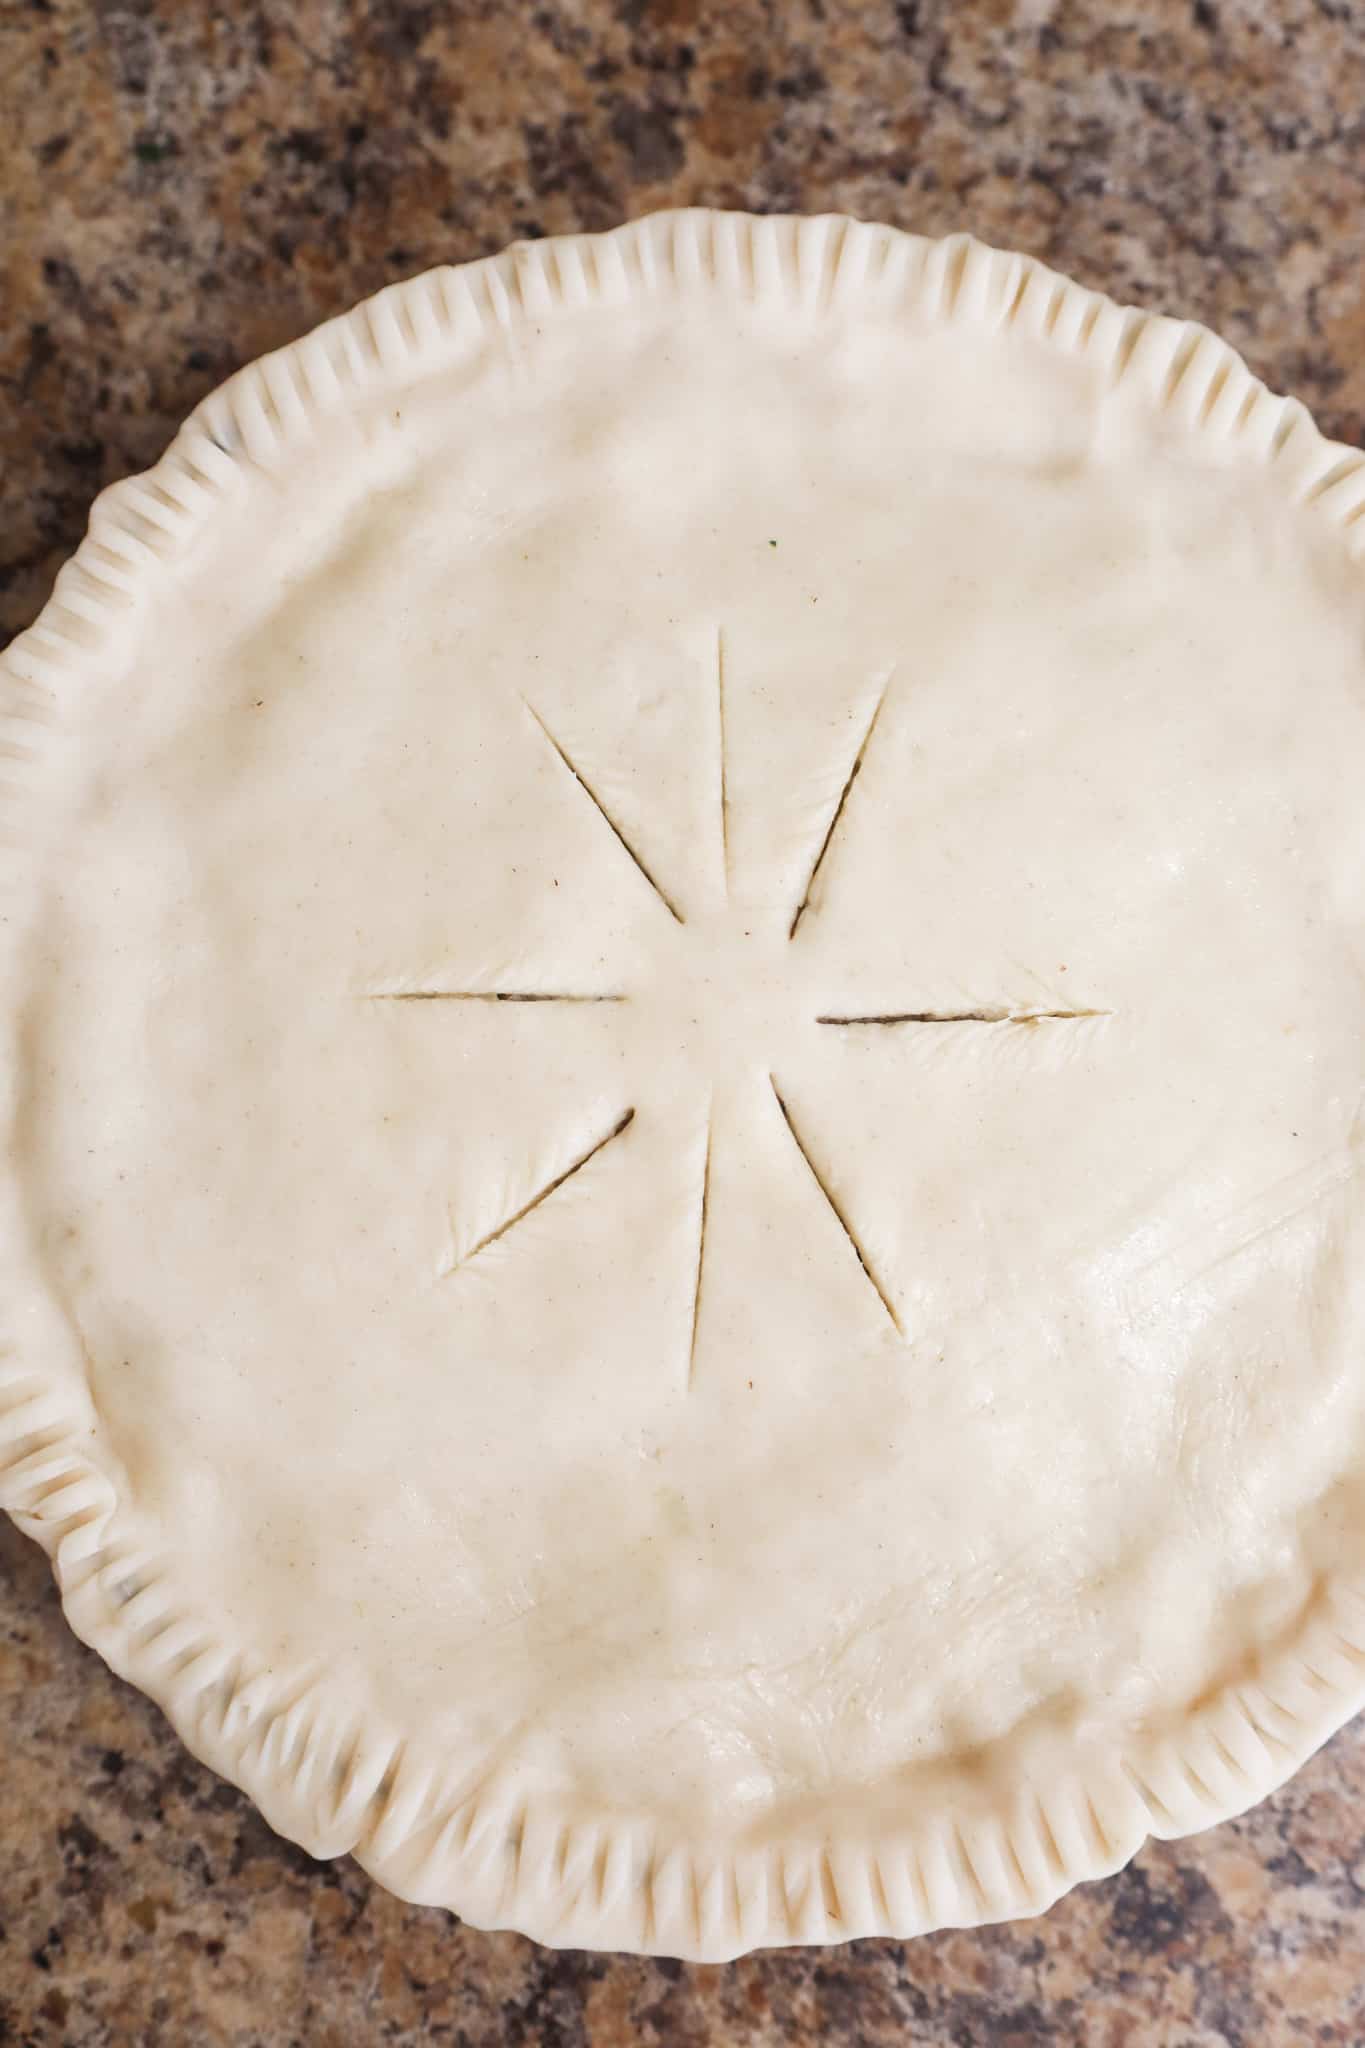 unbaked pie with slits in top crust